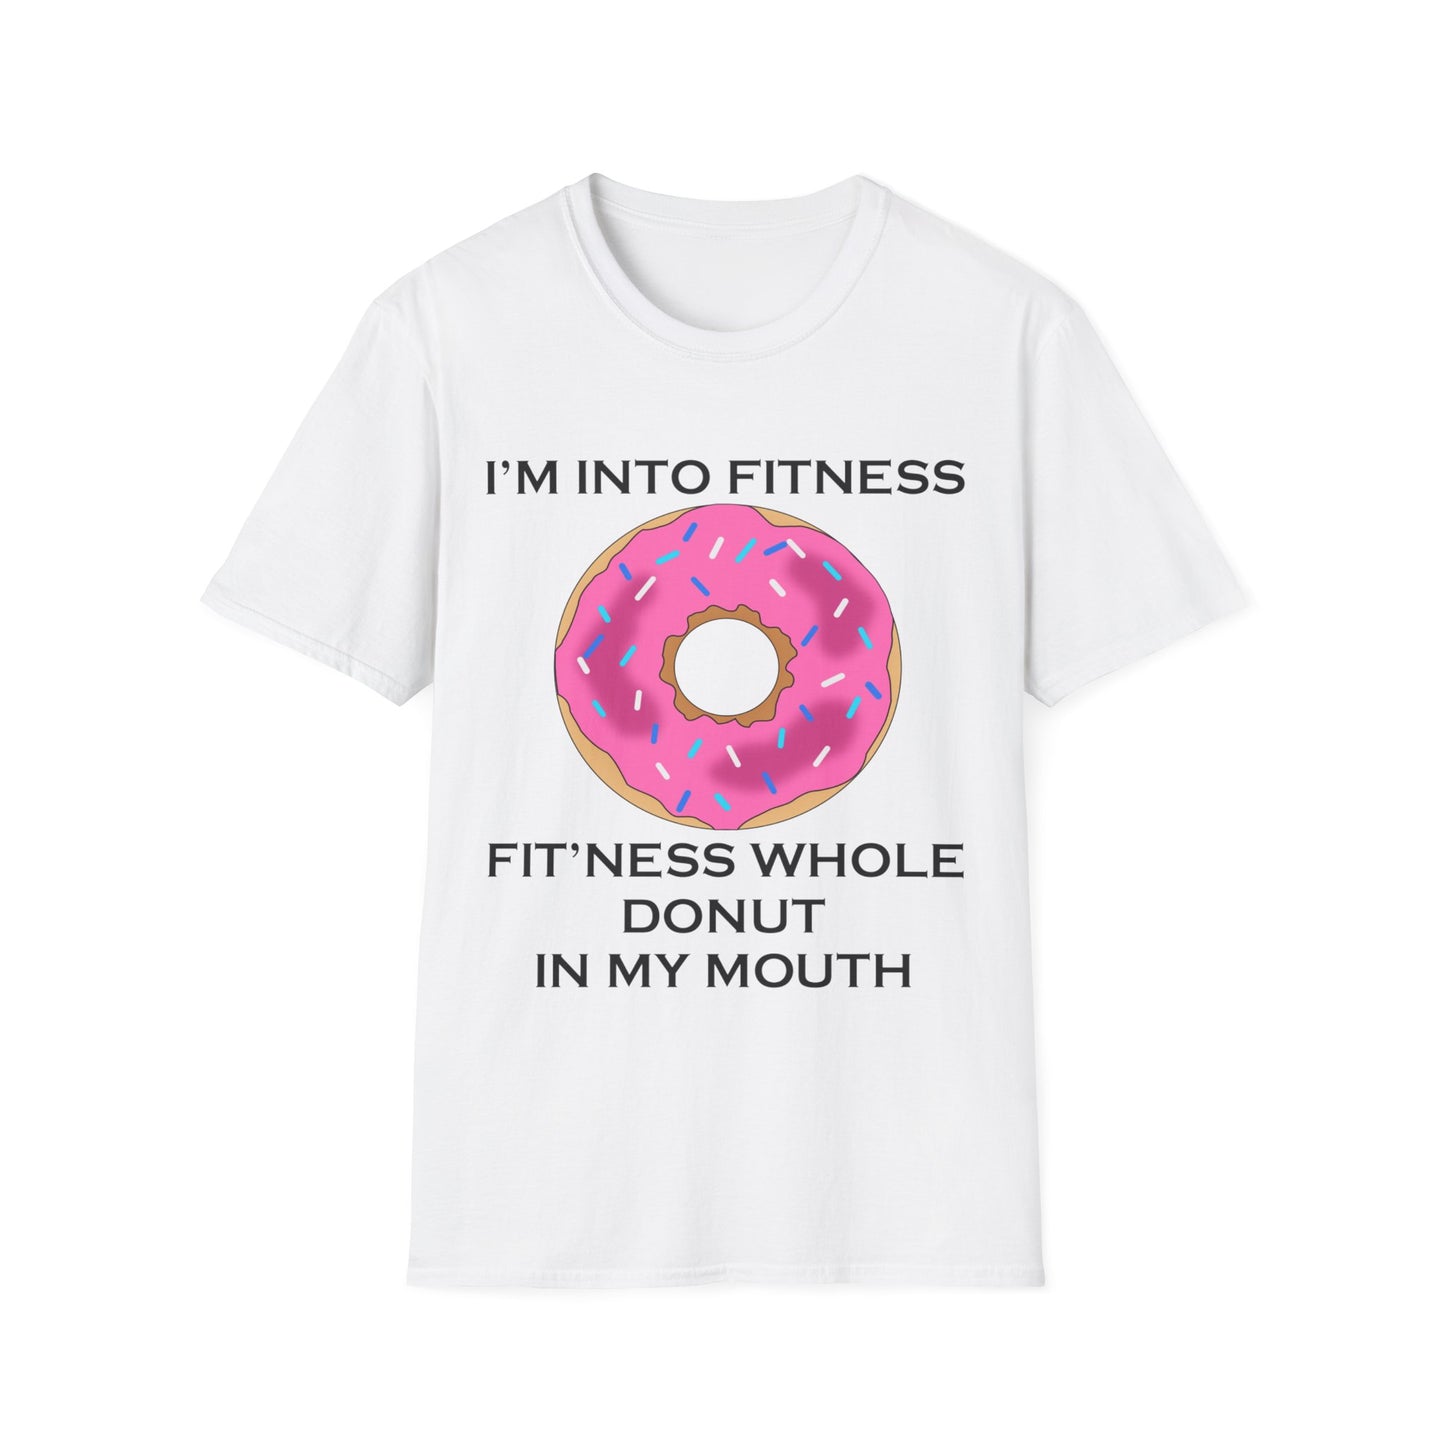 A white t-shirt with a design of a donut with pink icing and a funny quote: I'm Into fitness, Fit'ness Whole Donut In My Mouth